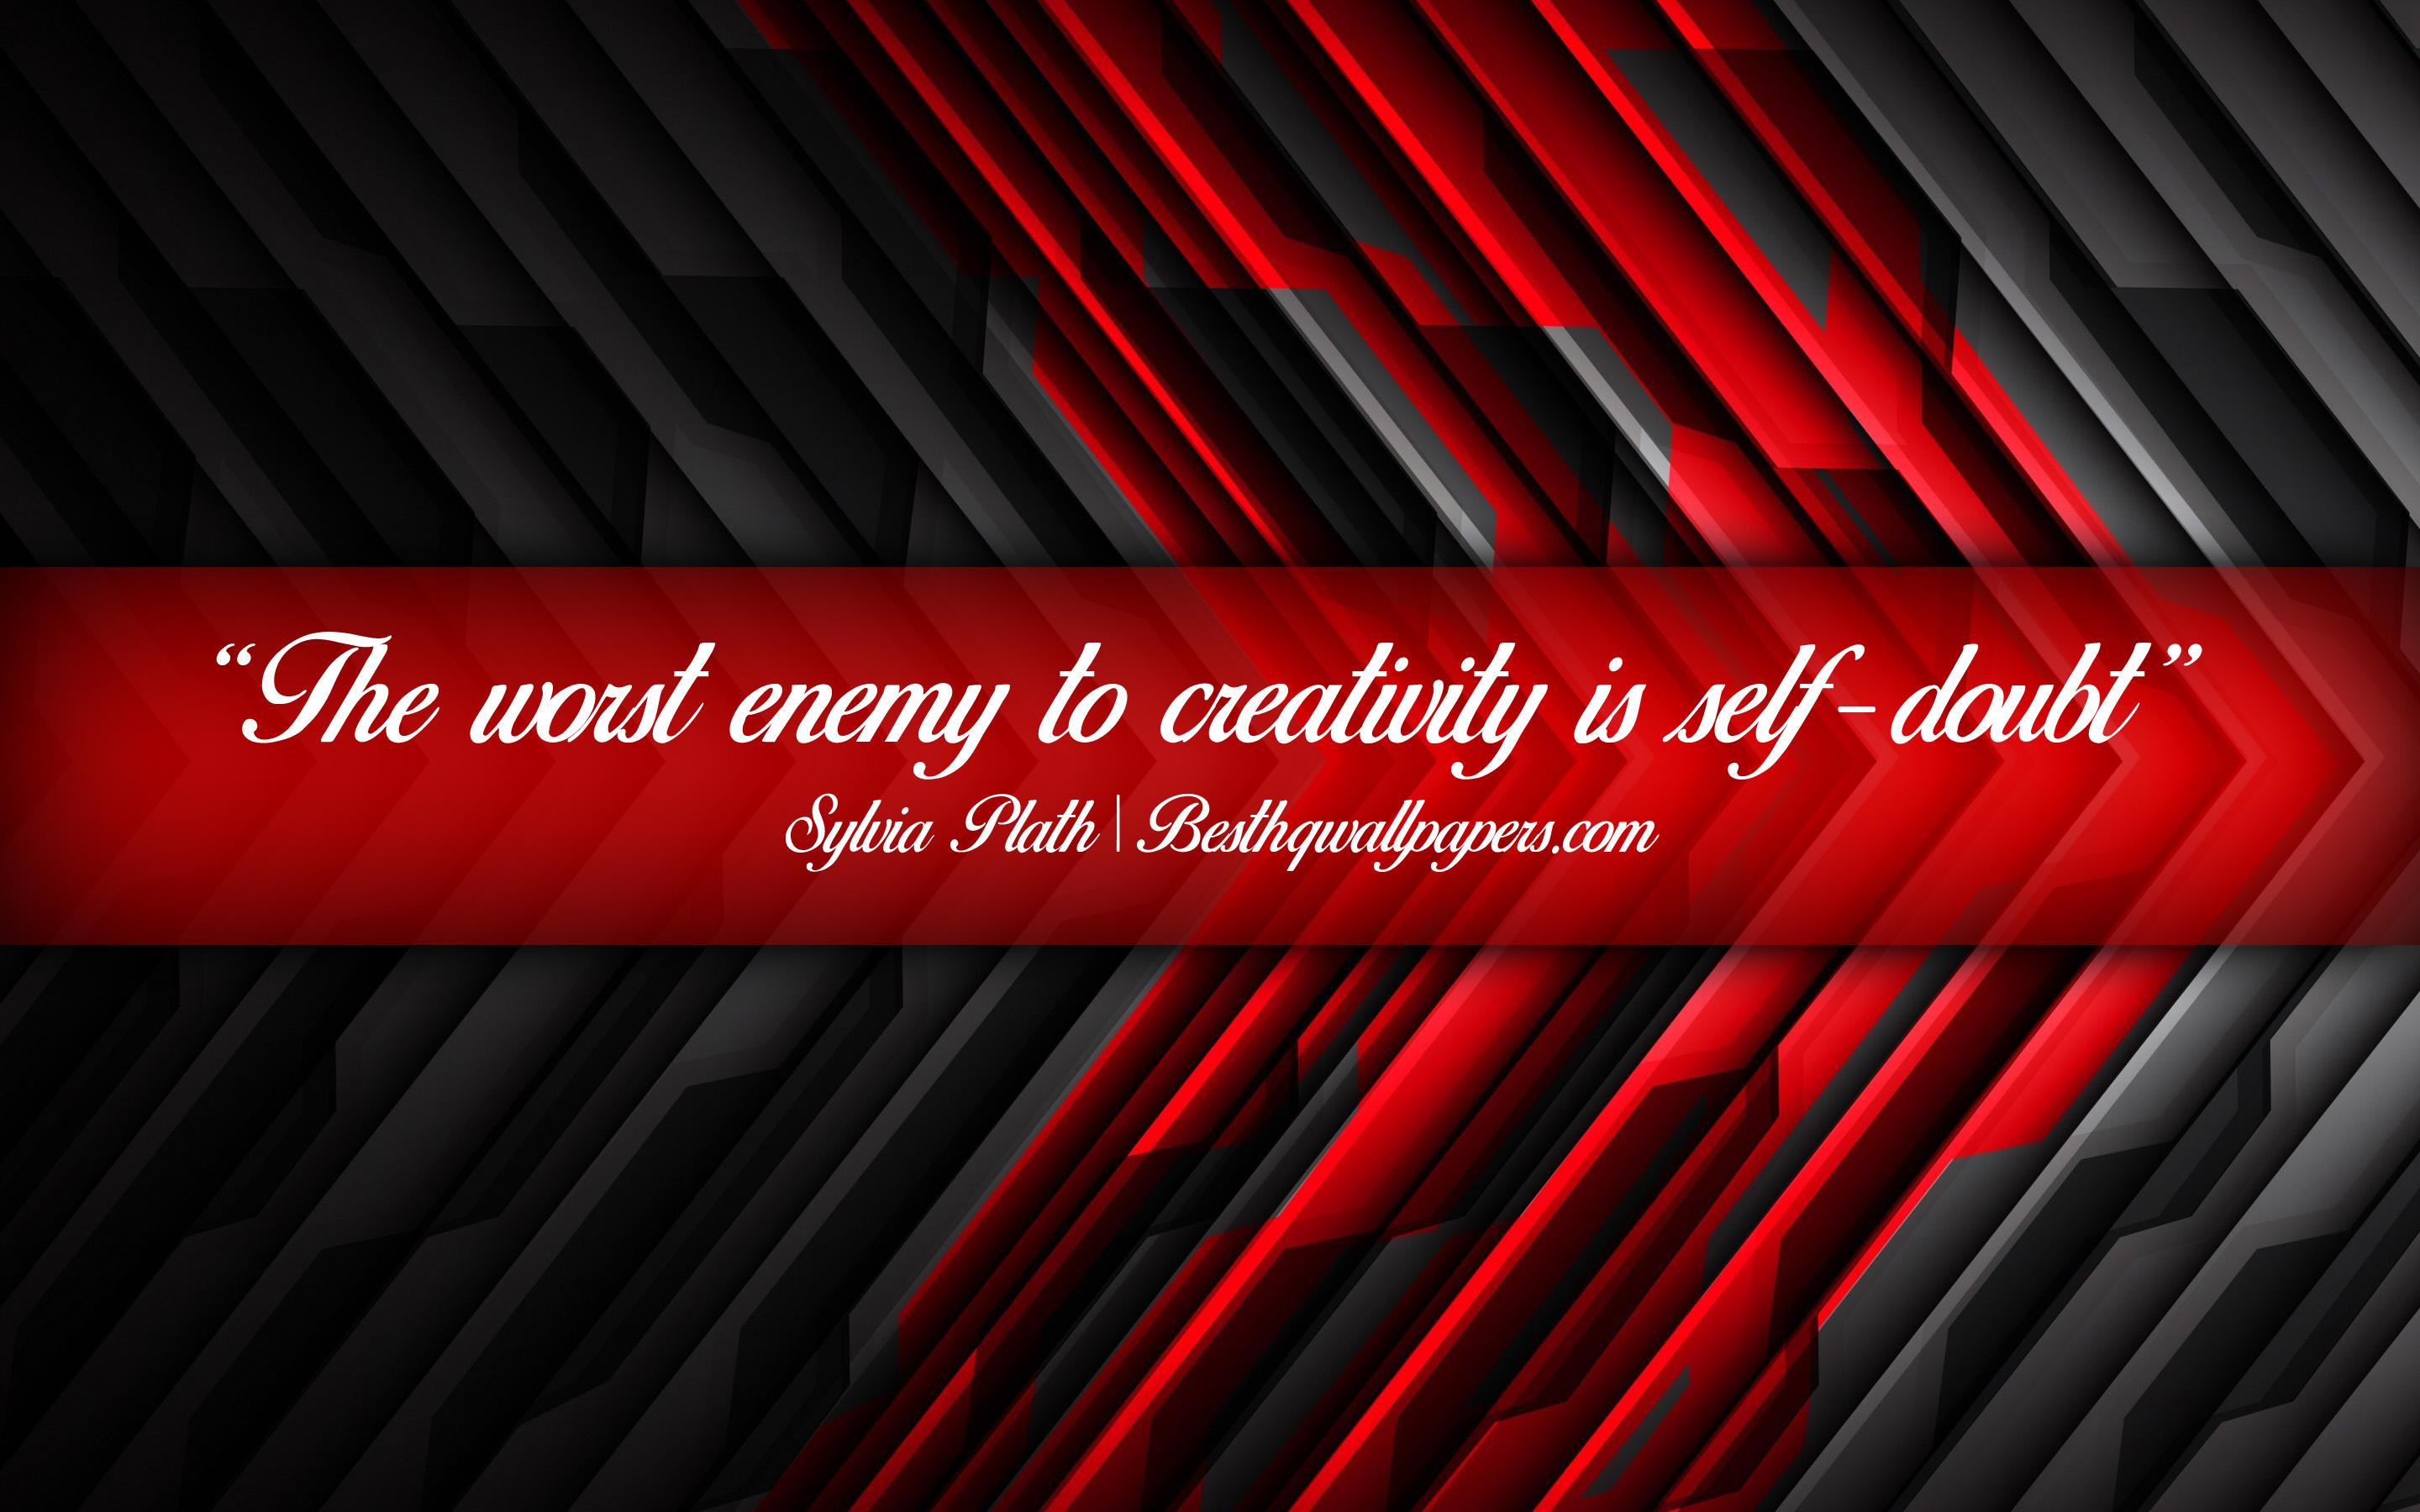 Download Wallpaper The Worst Enemy To Creativity Is Self Doubt, Sylvia Plath, Calligraphic Text, Quotes About Creativity, Sylvia Plath Quotes, Inspiration, Black Arrows Background For Desktop With Resolution 2880x1800. High Quality HD Picture